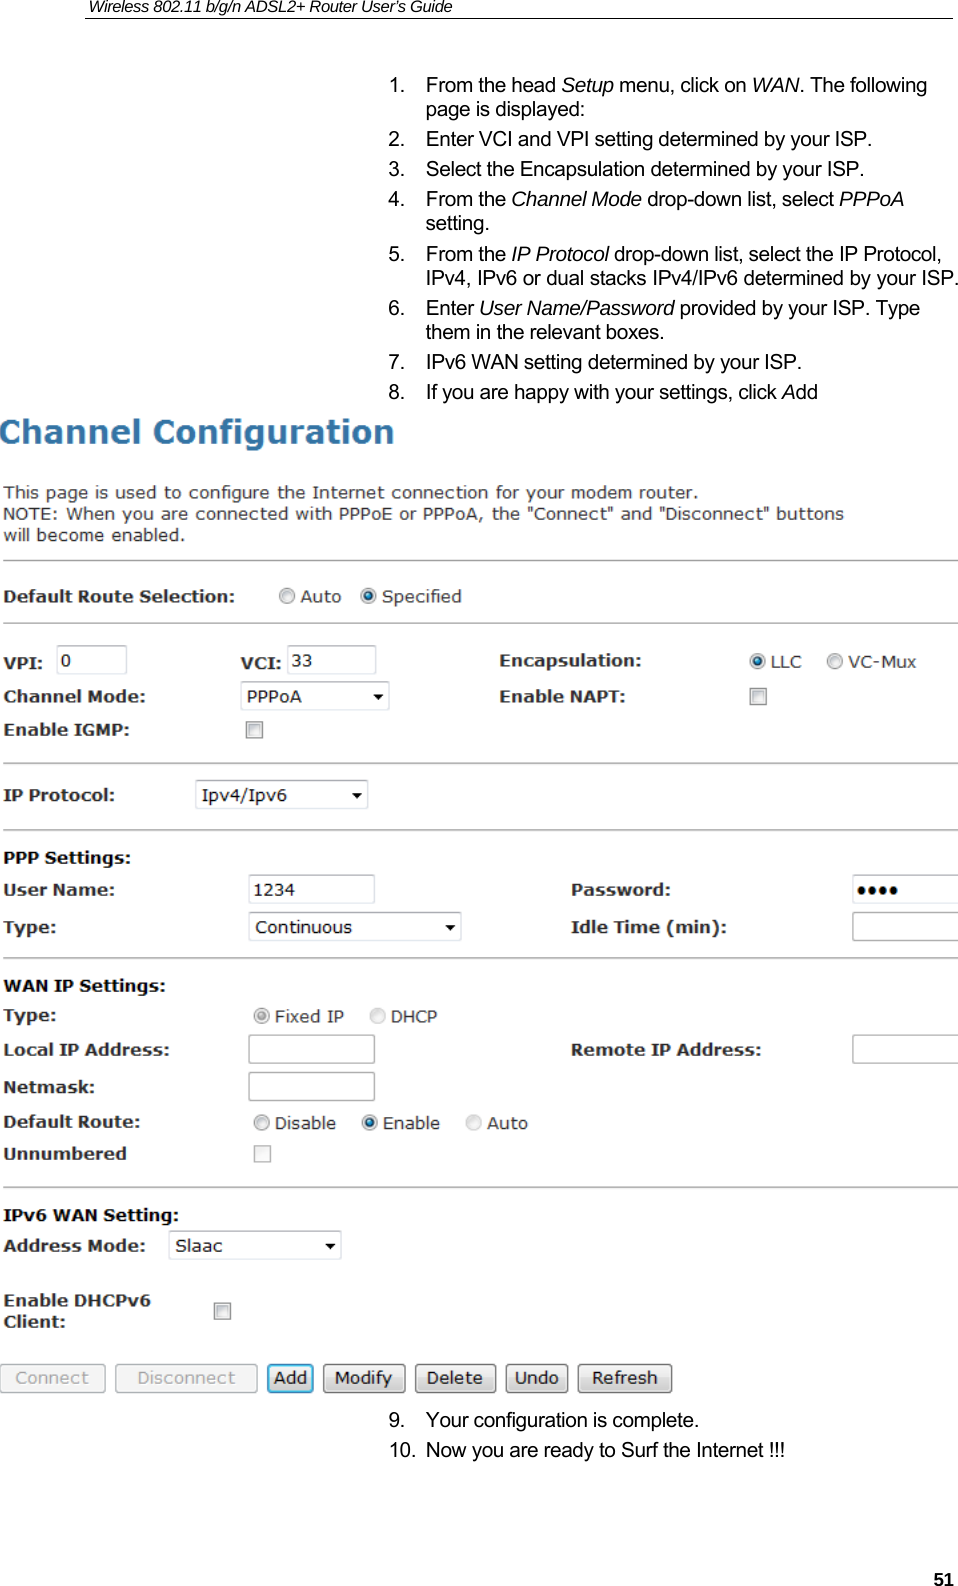 Wireless 802.11 b/g/n ADSL2+ Router User’s Guide    1. From the head Setup menu, click on WAN. The following page is displayed: 2.  Enter VCI and VPI setting determined by your ISP. 3.  Select the Encapsulation determined by your ISP. 4. From the Channel Mode drop-down list, select PPPoA setting. 5. From the IP Protocol drop-down list, select the IP Protocol, IPv4, IPv6 or dual stacks IPv4/IPv6 determined by your ISP. 6. Enter User Name/Password provided by your ISP. Type them in the relevant boxes. 7.  IPv6 WAN setting determined by your ISP. 8.  If you are happy with your settings, click Add  9.  Your configuration is complete. 10.  Now you are ready to Surf the Internet !!!   51